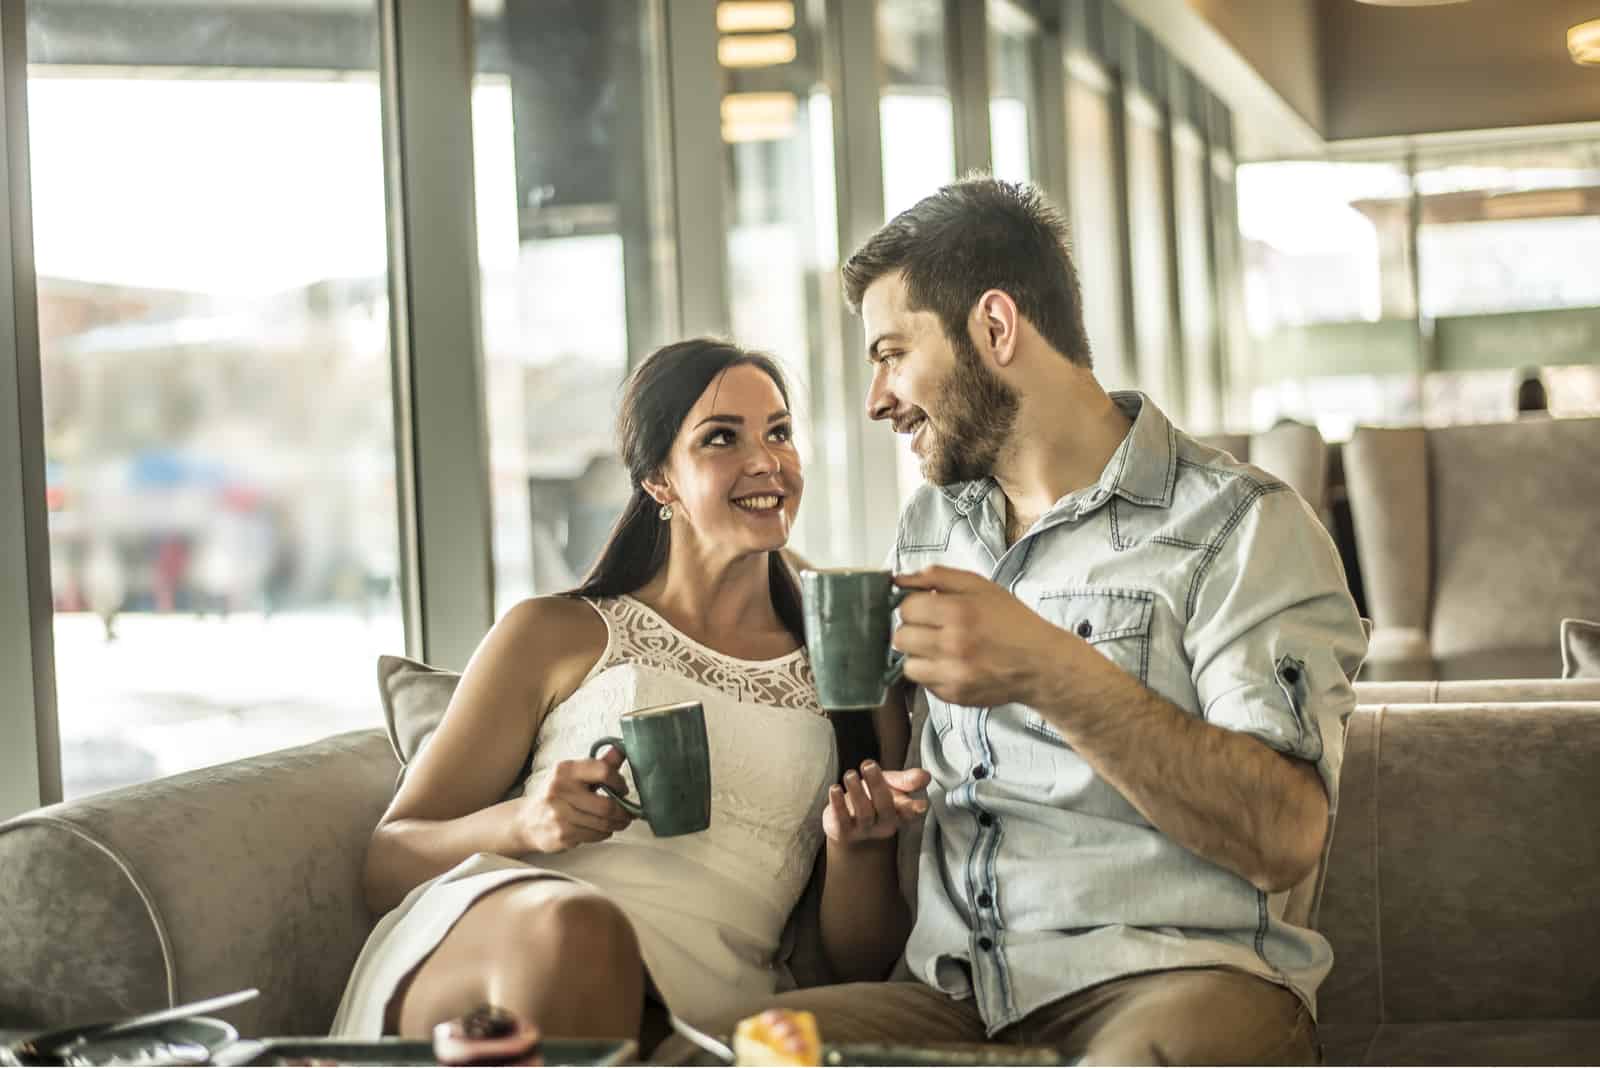 a smiling man and woman sit in a cafe and drink coffee